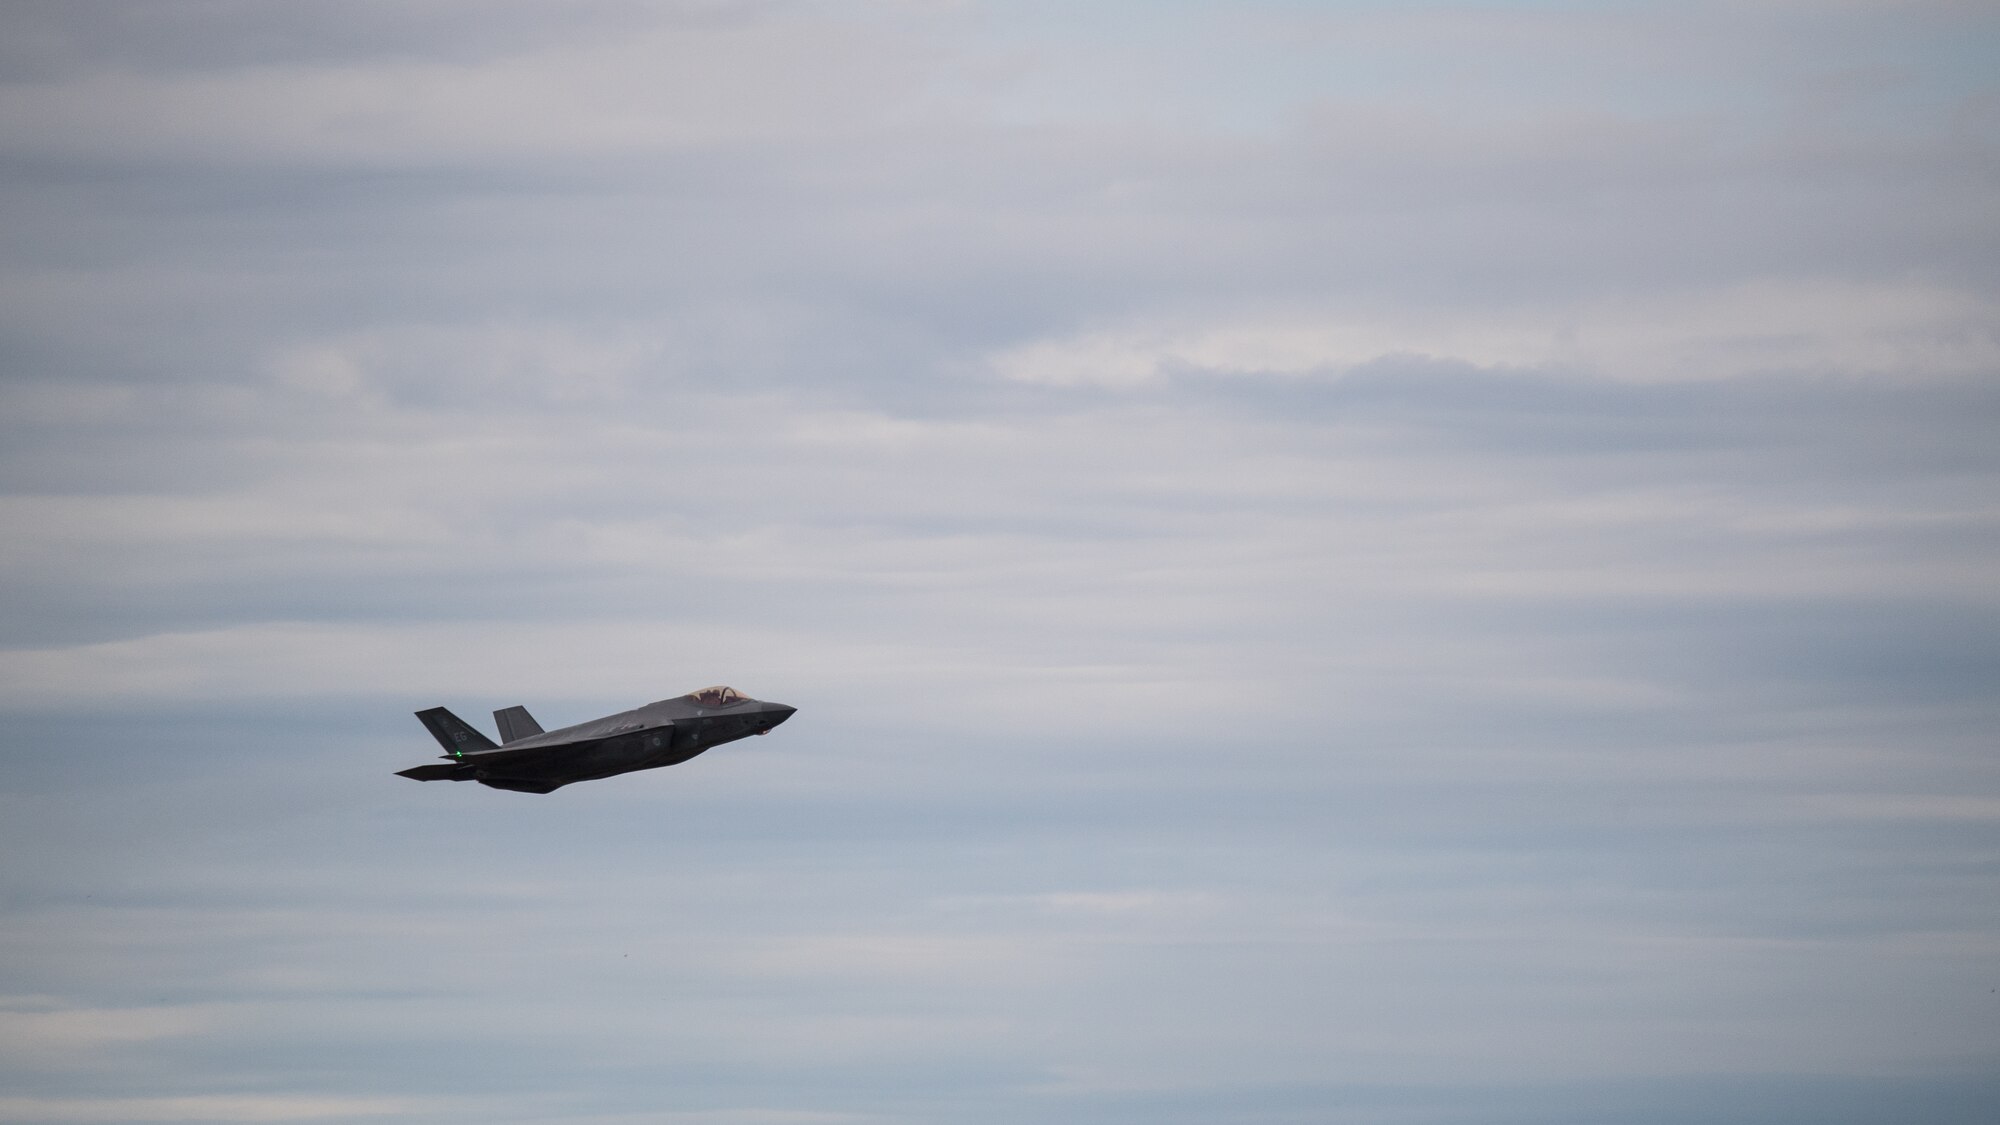 An F-35 Lightning from Eglin Air Force Base, Fla., takes flight at Barksdale Air Force Base, La., Oct. 12, 2018. The aircraft evacuated to Barksdale to avoid possible damage from Hurricane Michael. (U.S. Air Force photo by Airman 1st Class Lillian Miller)